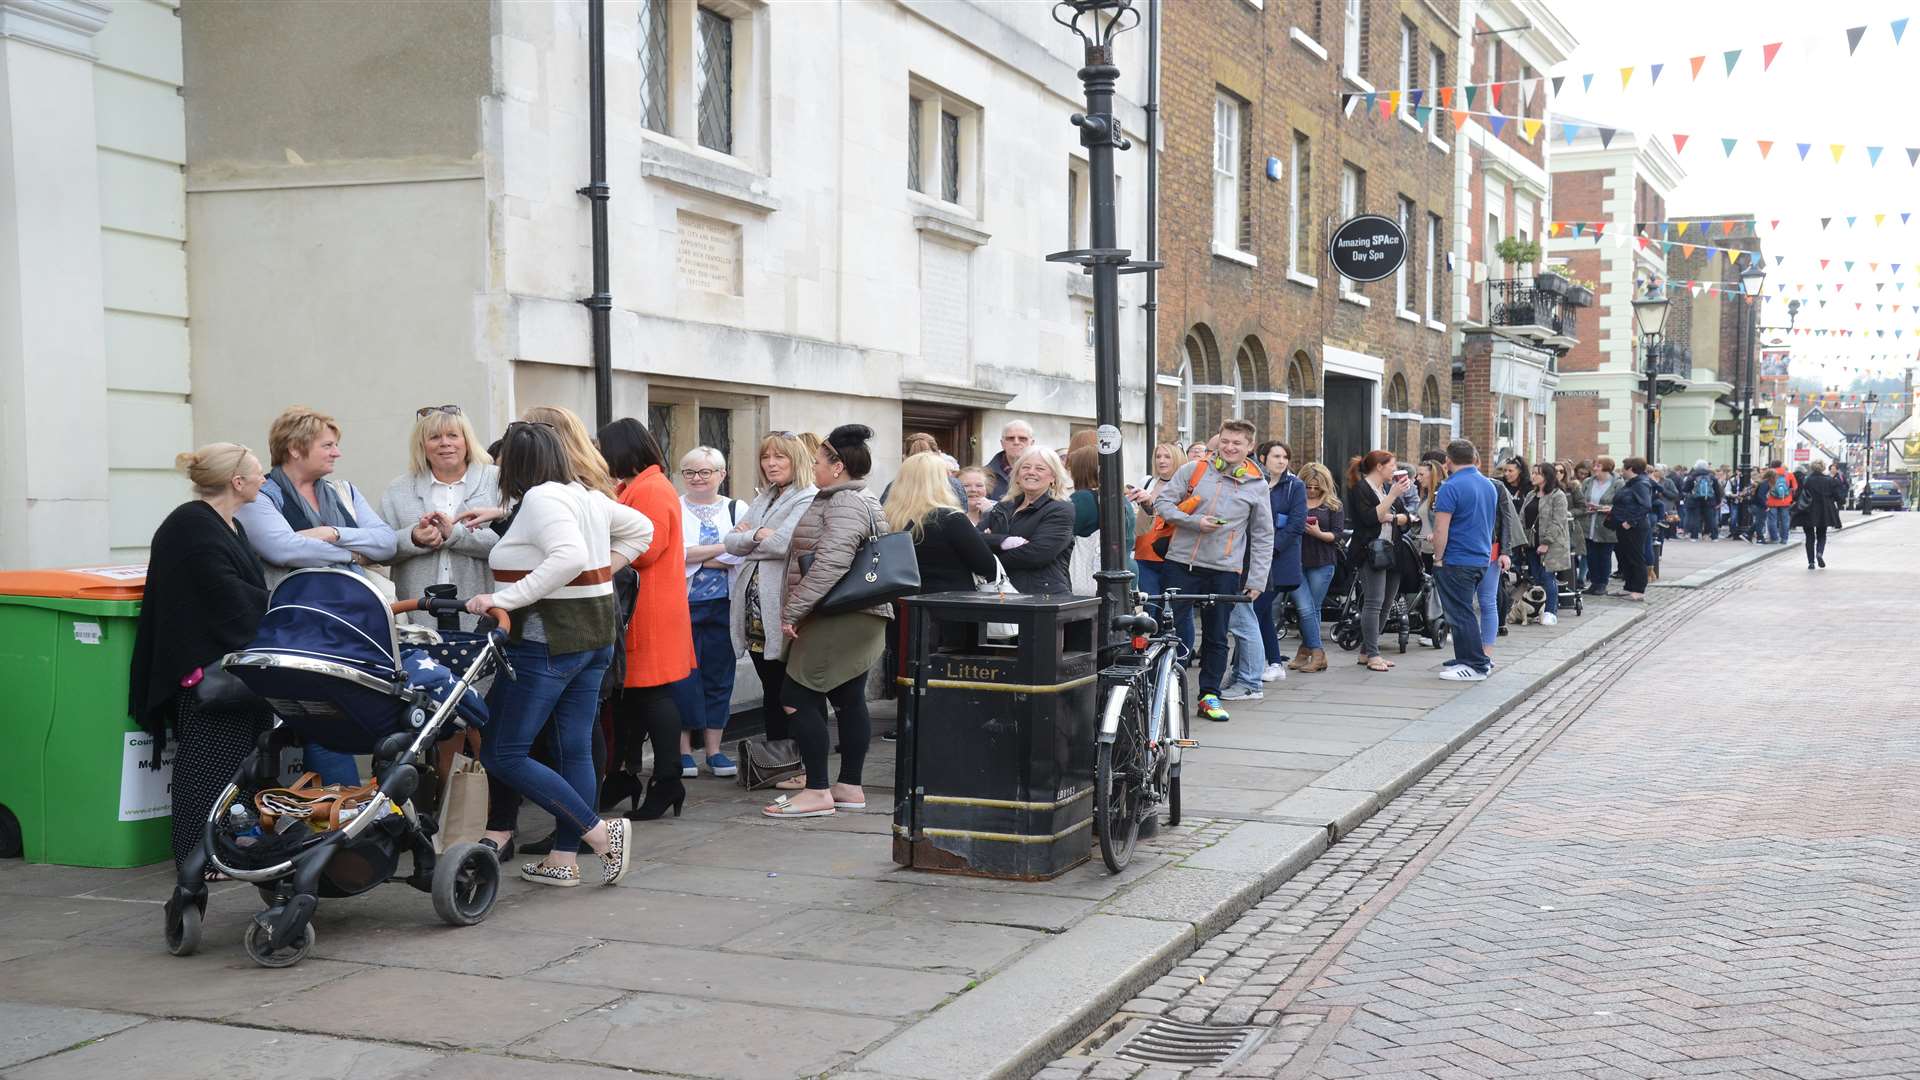 Fans queuing for Craig David tickets in Rochester